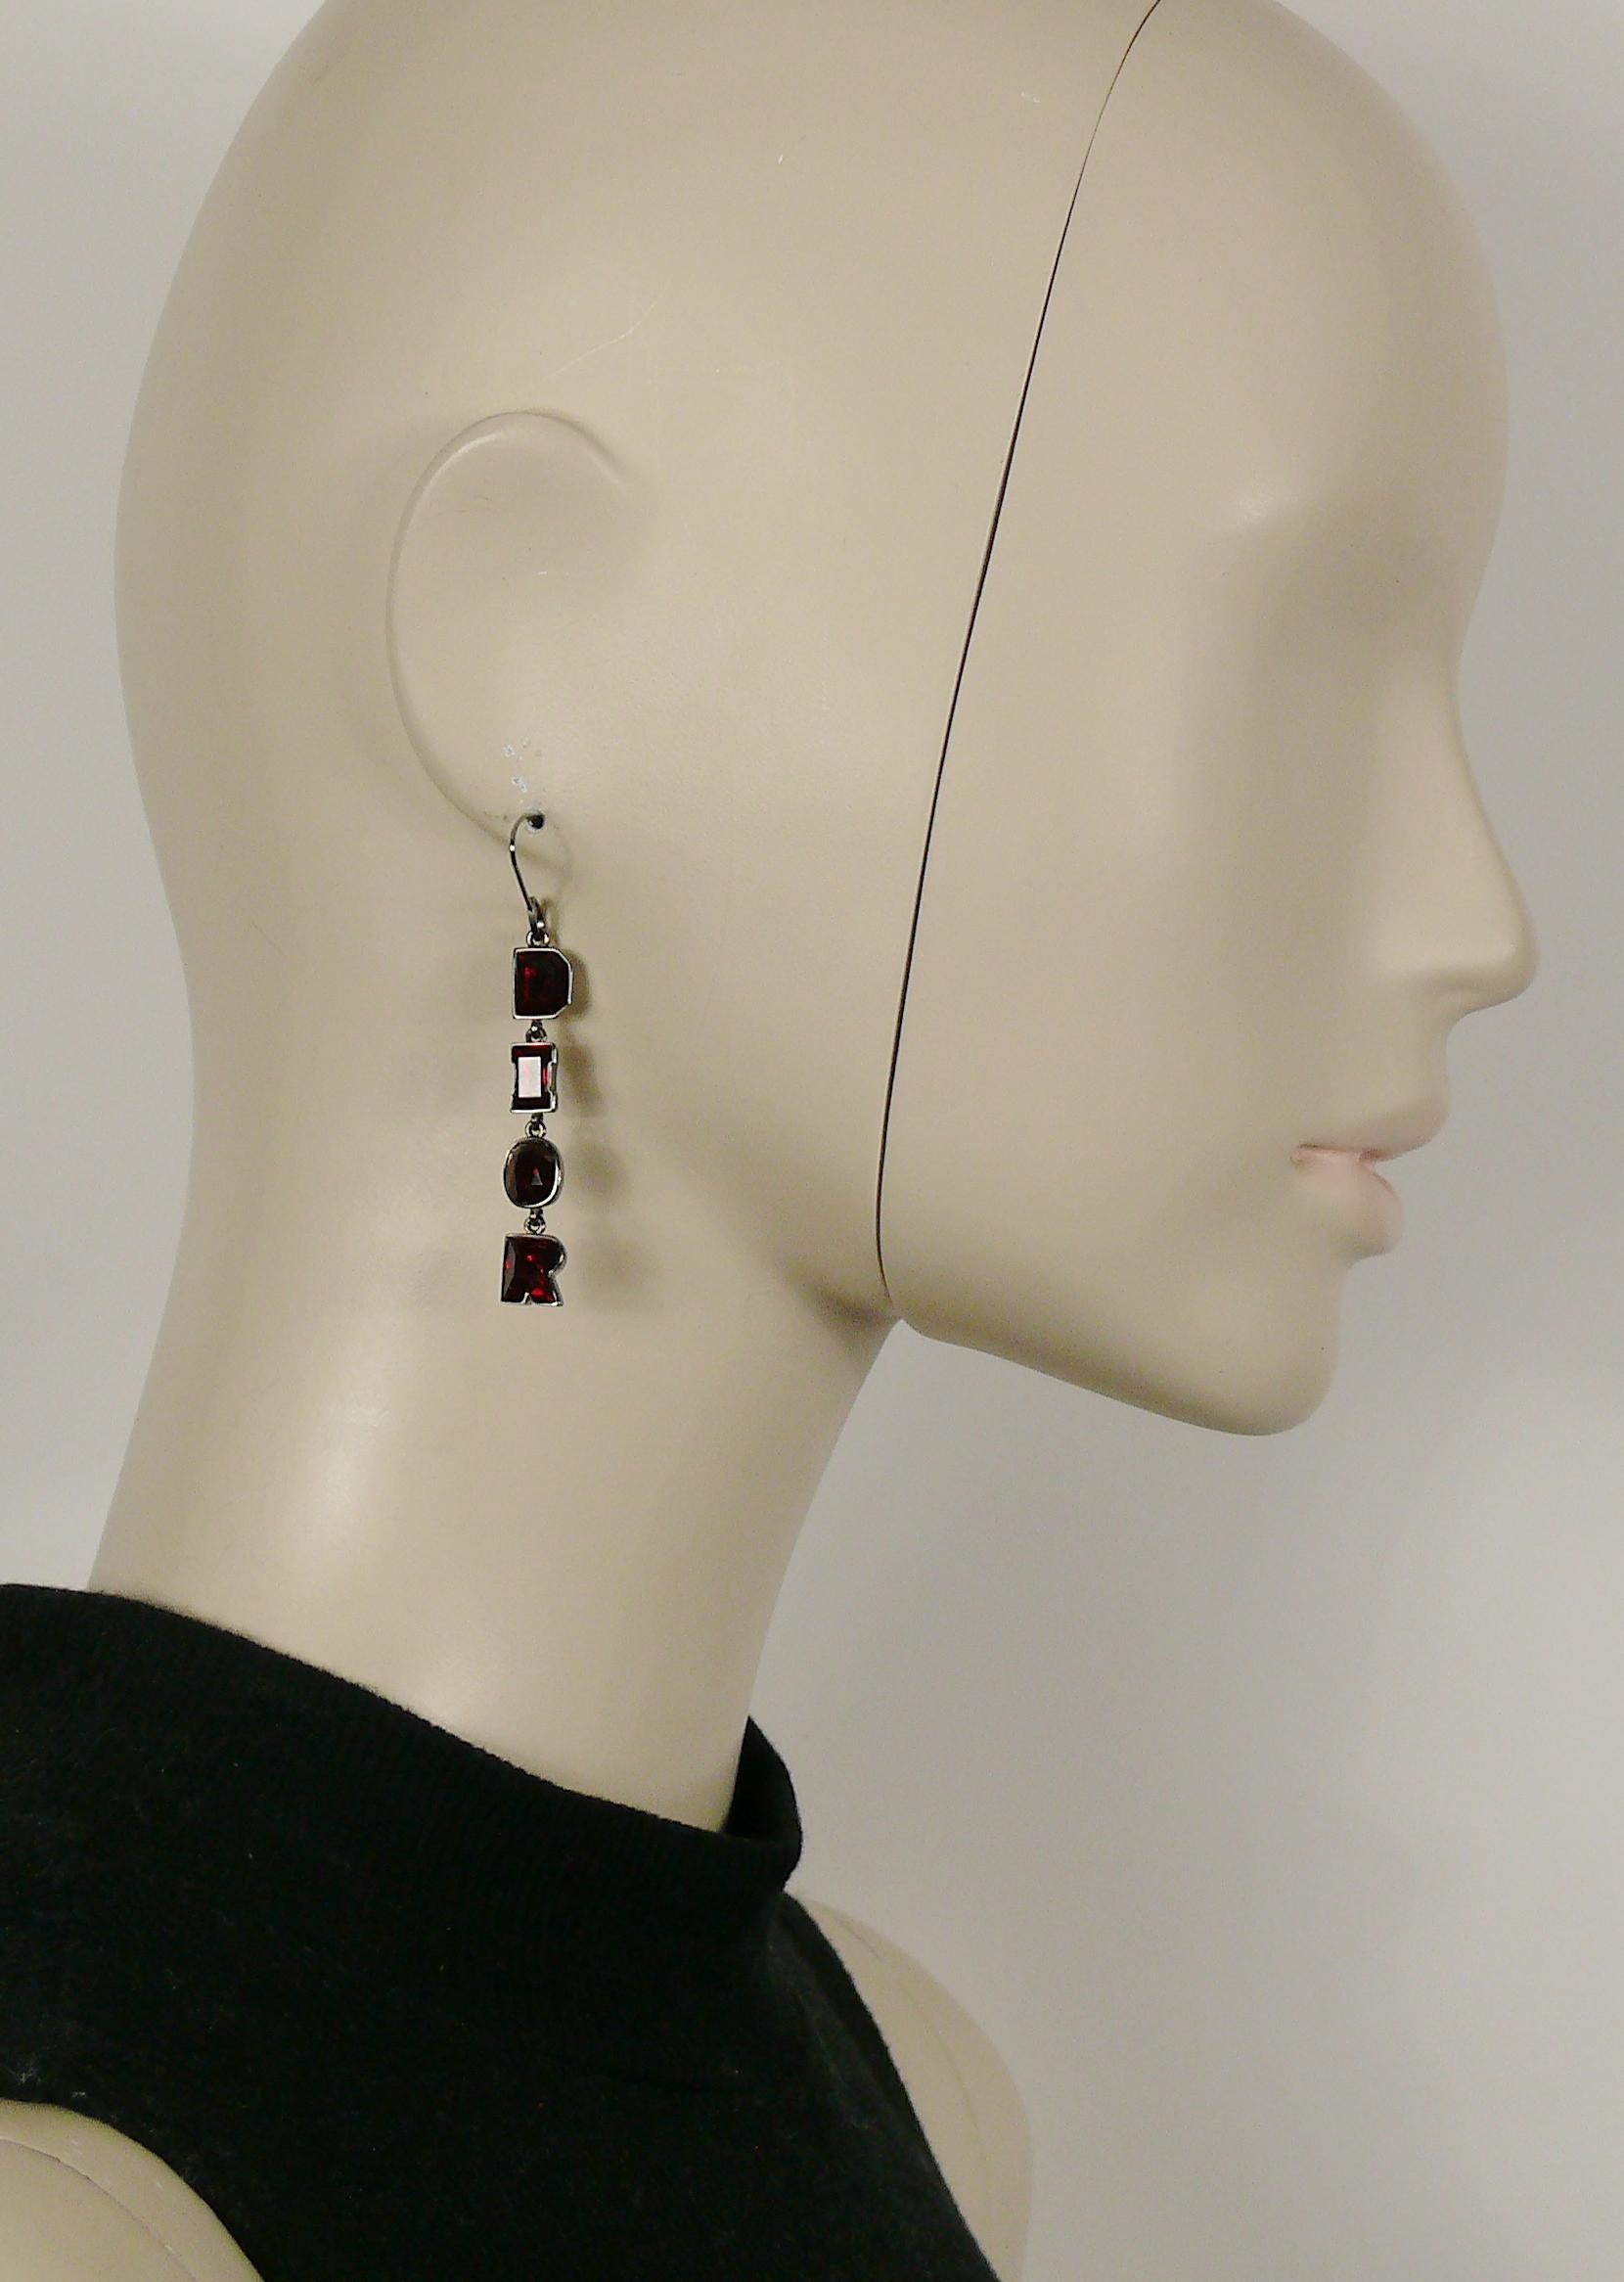 CHRISTIAN DIOR vintage gun patina dangling earrings (for pierced ears) featuring a rurby red crystal D I O R logo.

Unmarked.

Indicative measurements : height approx. 6.3 cm (2.48 inches) / max. width approx. 0.7 cm (0.28 inch).

NOTES
- This is a